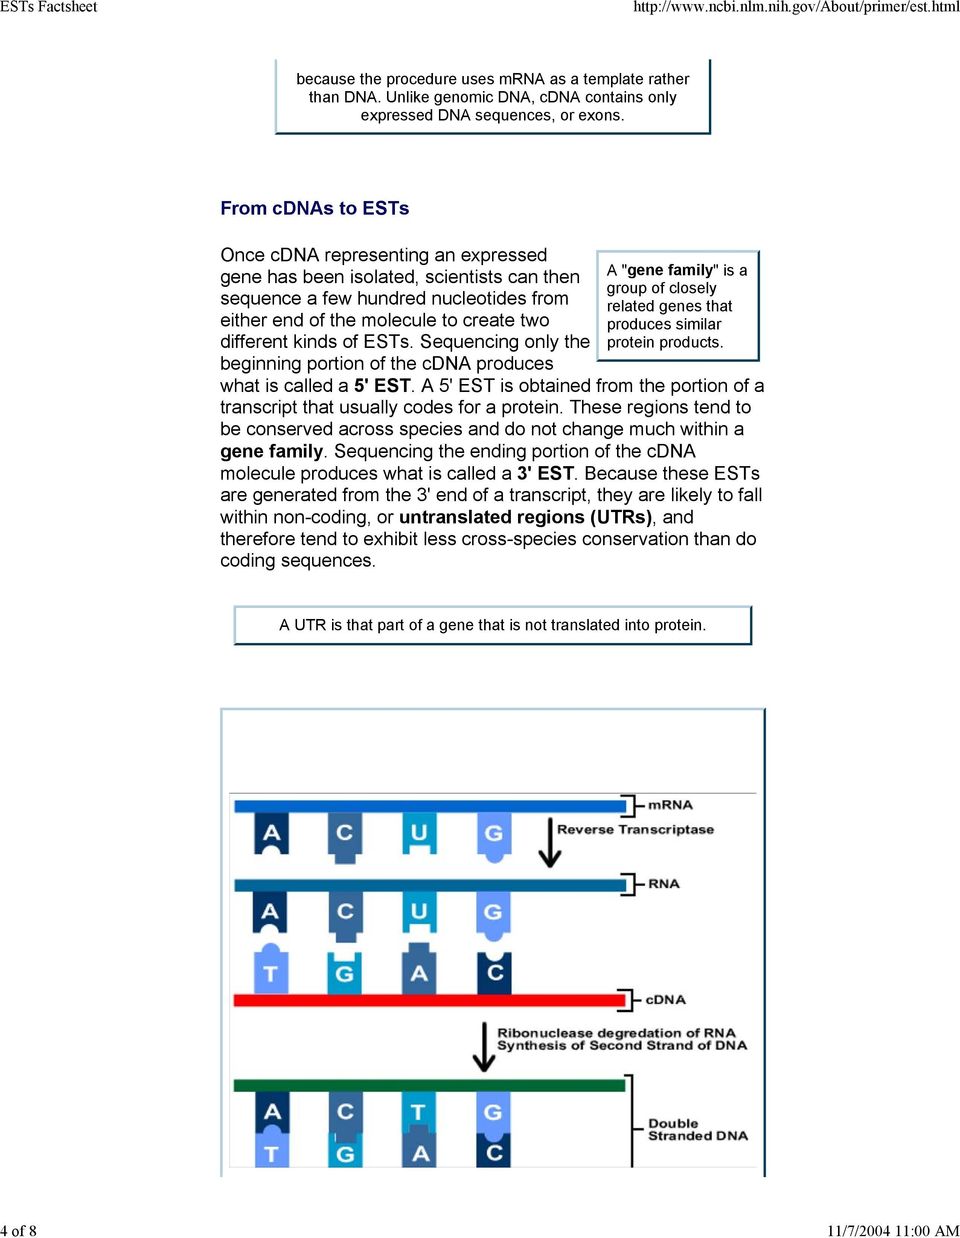 ESTs. Sequencing only the beginning portion of the cdna produces A "gene family" is a group of closely related genes that produces similar protein products. what is called a 5' EST.